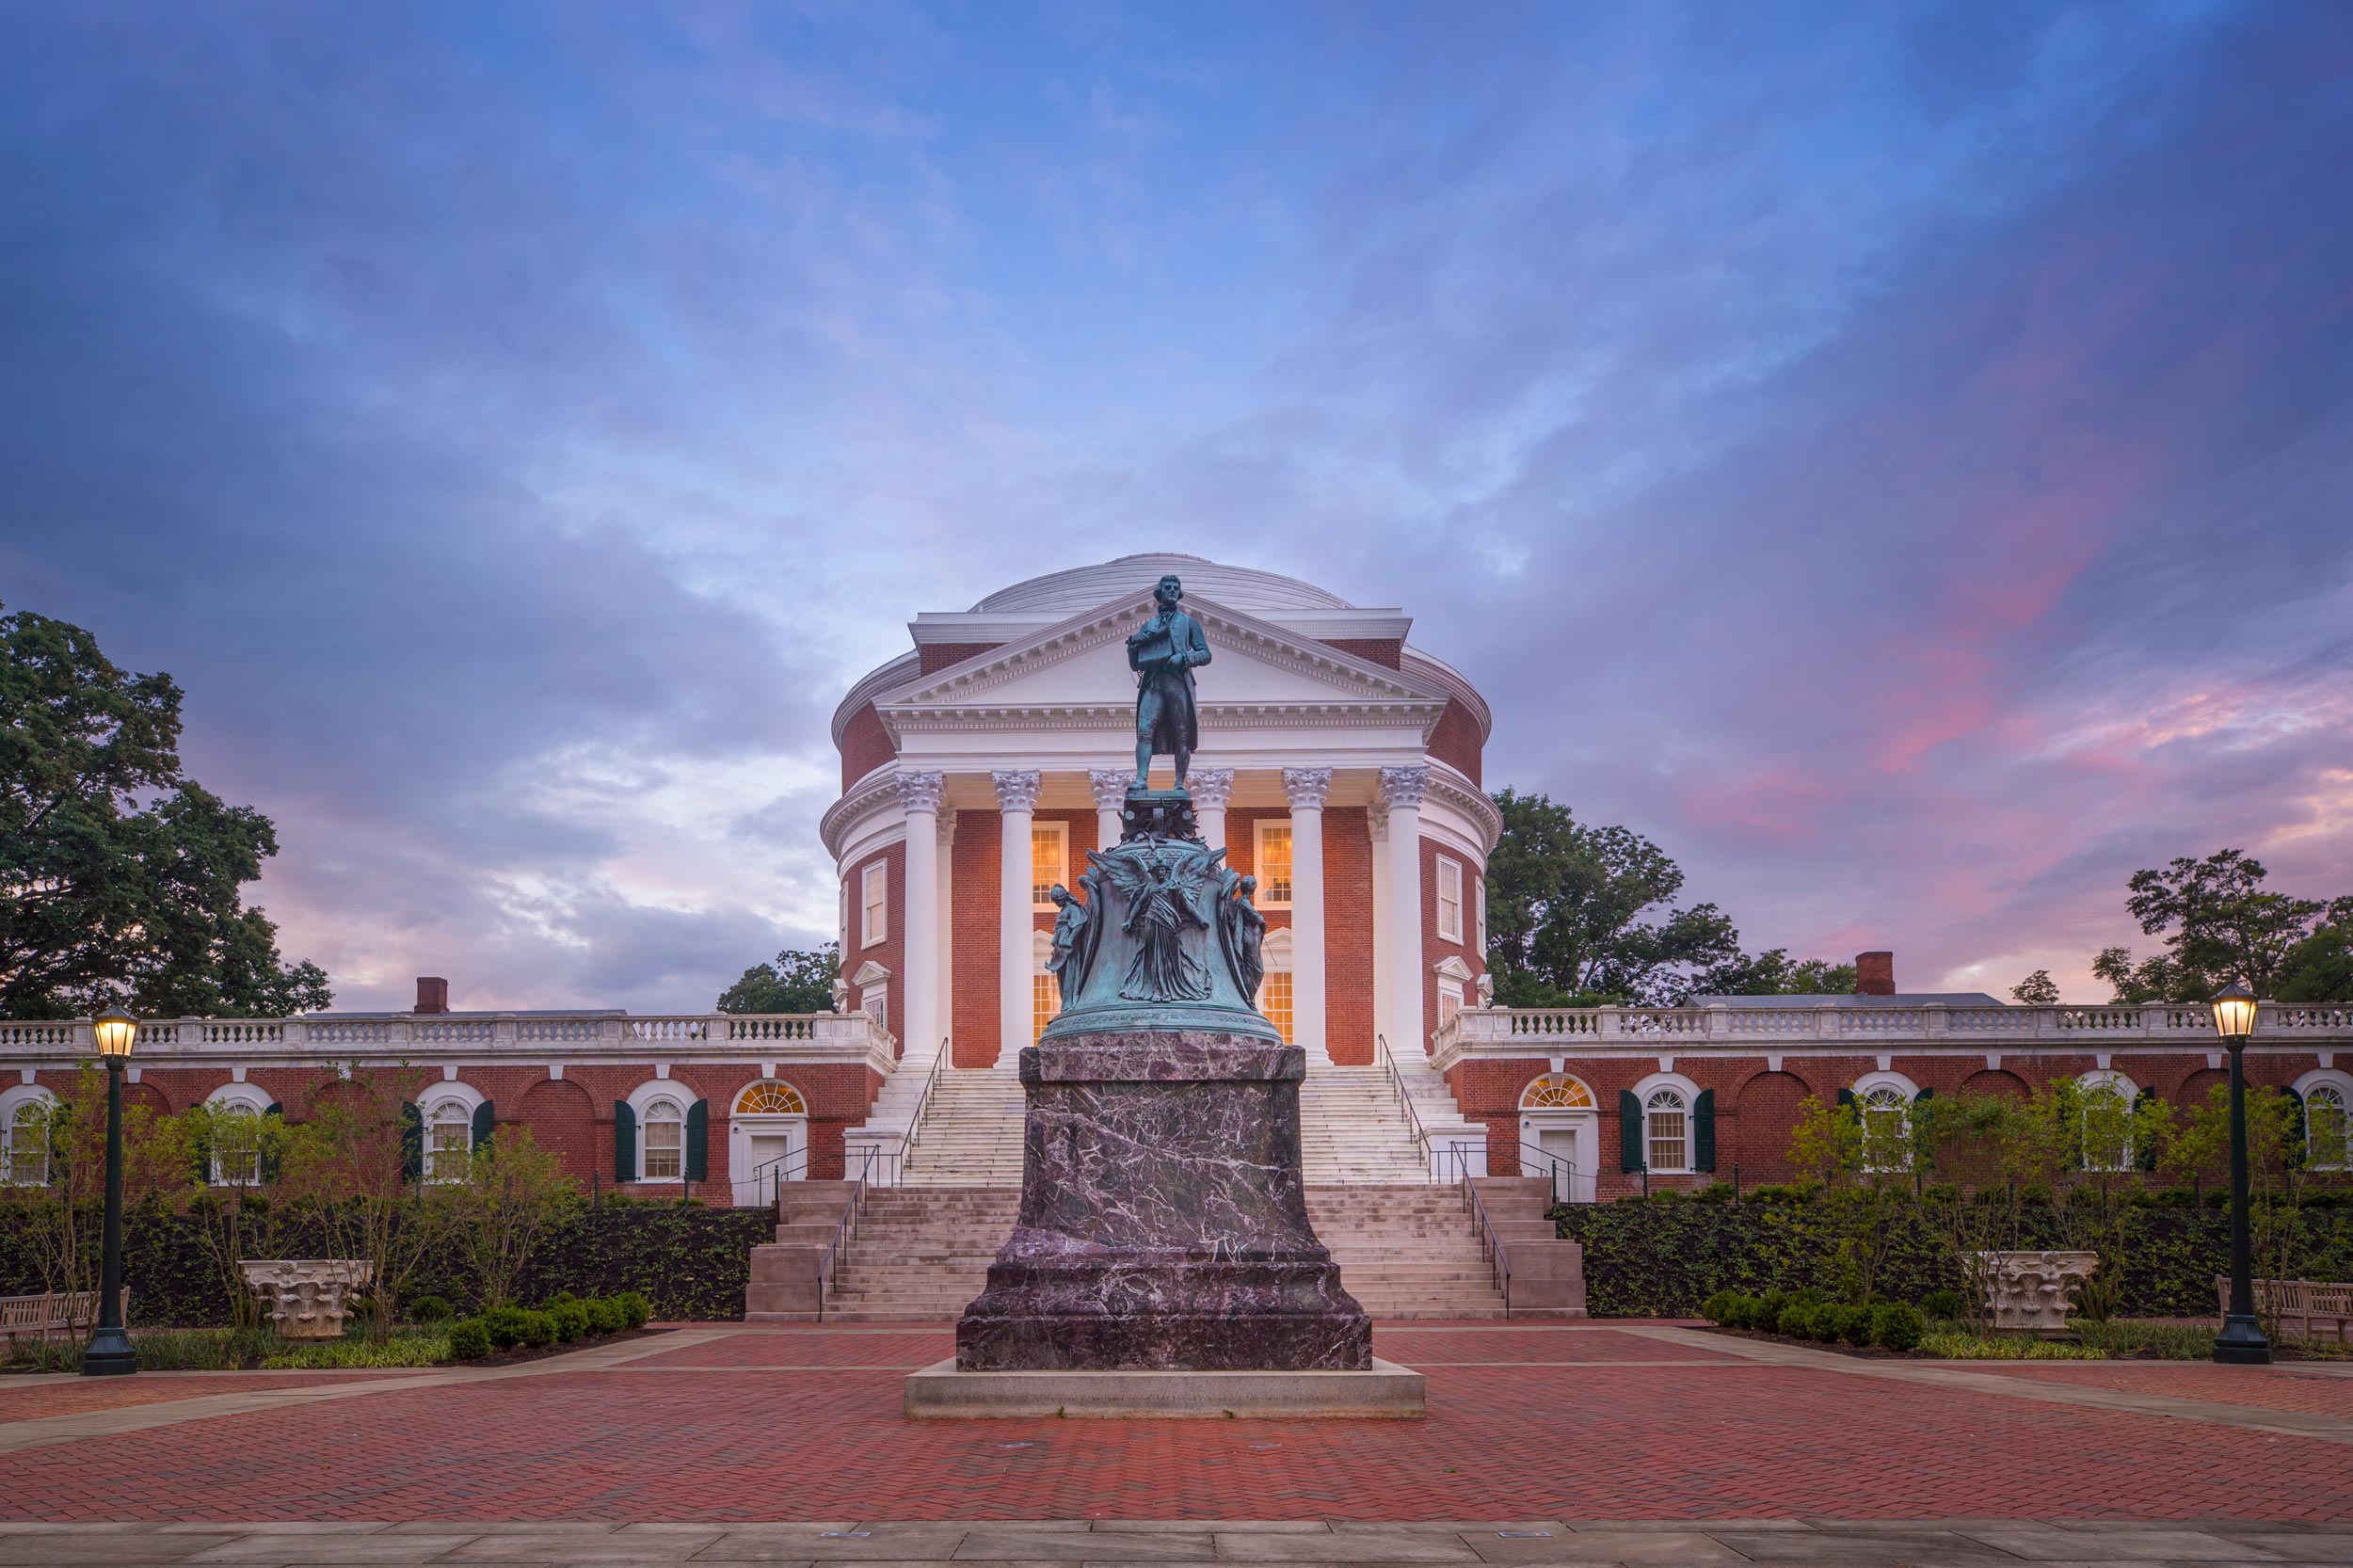 Thomas Jefferson statue in front of the Rotunda with a blue, purple, and pink clouds